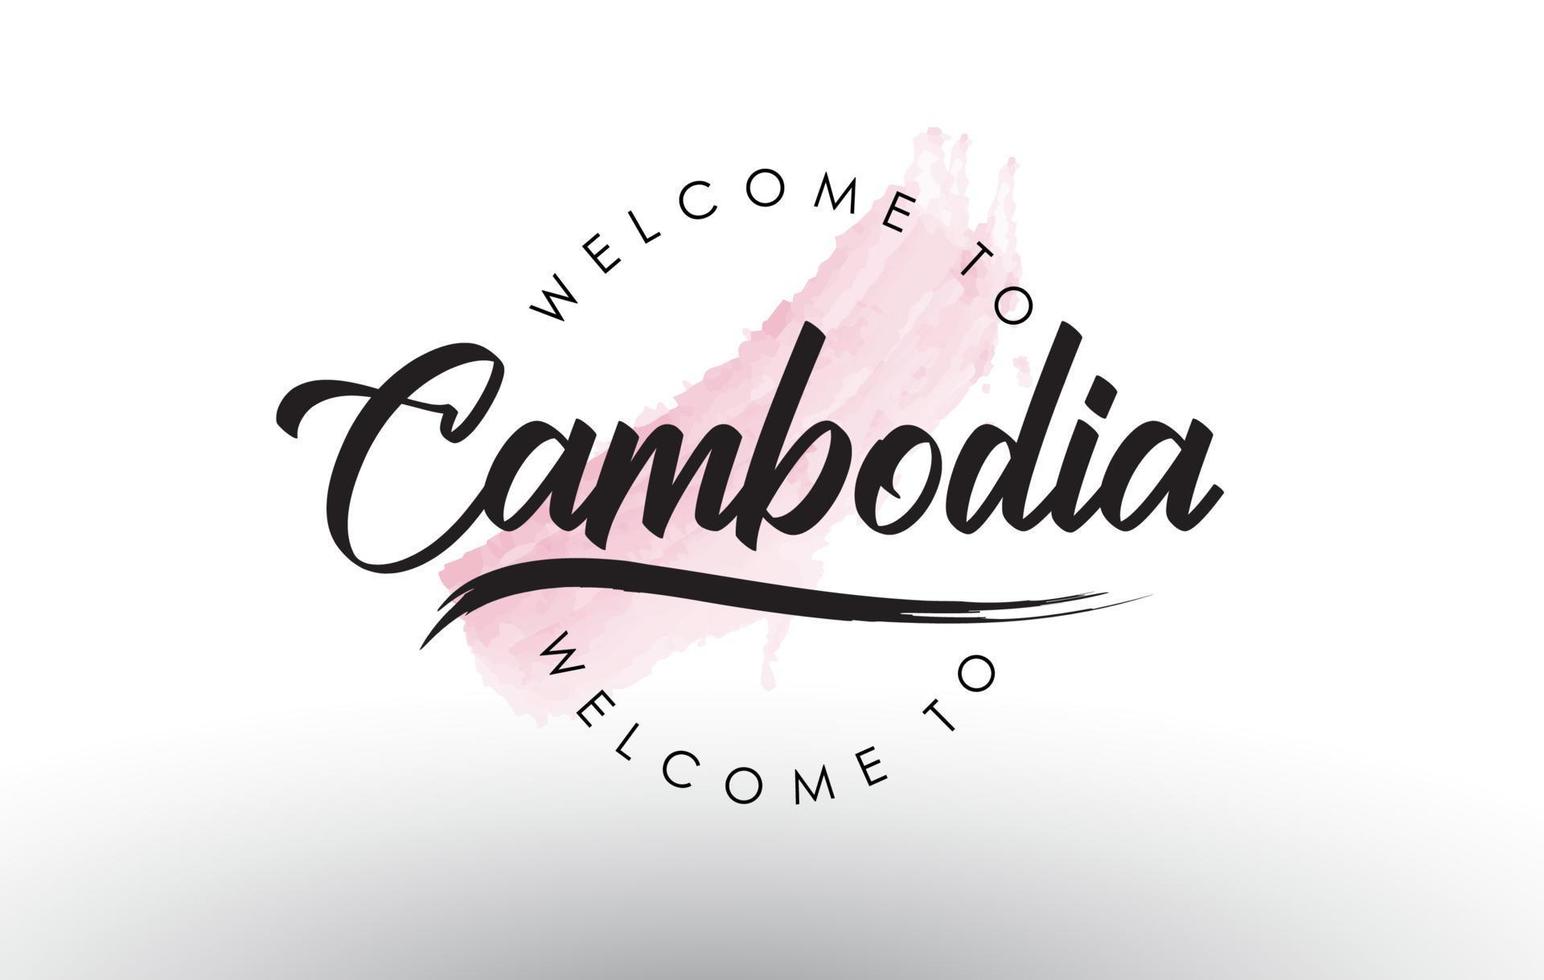 Cambodia Welcome to Text with Watercolor Pink Brush Stroke vector